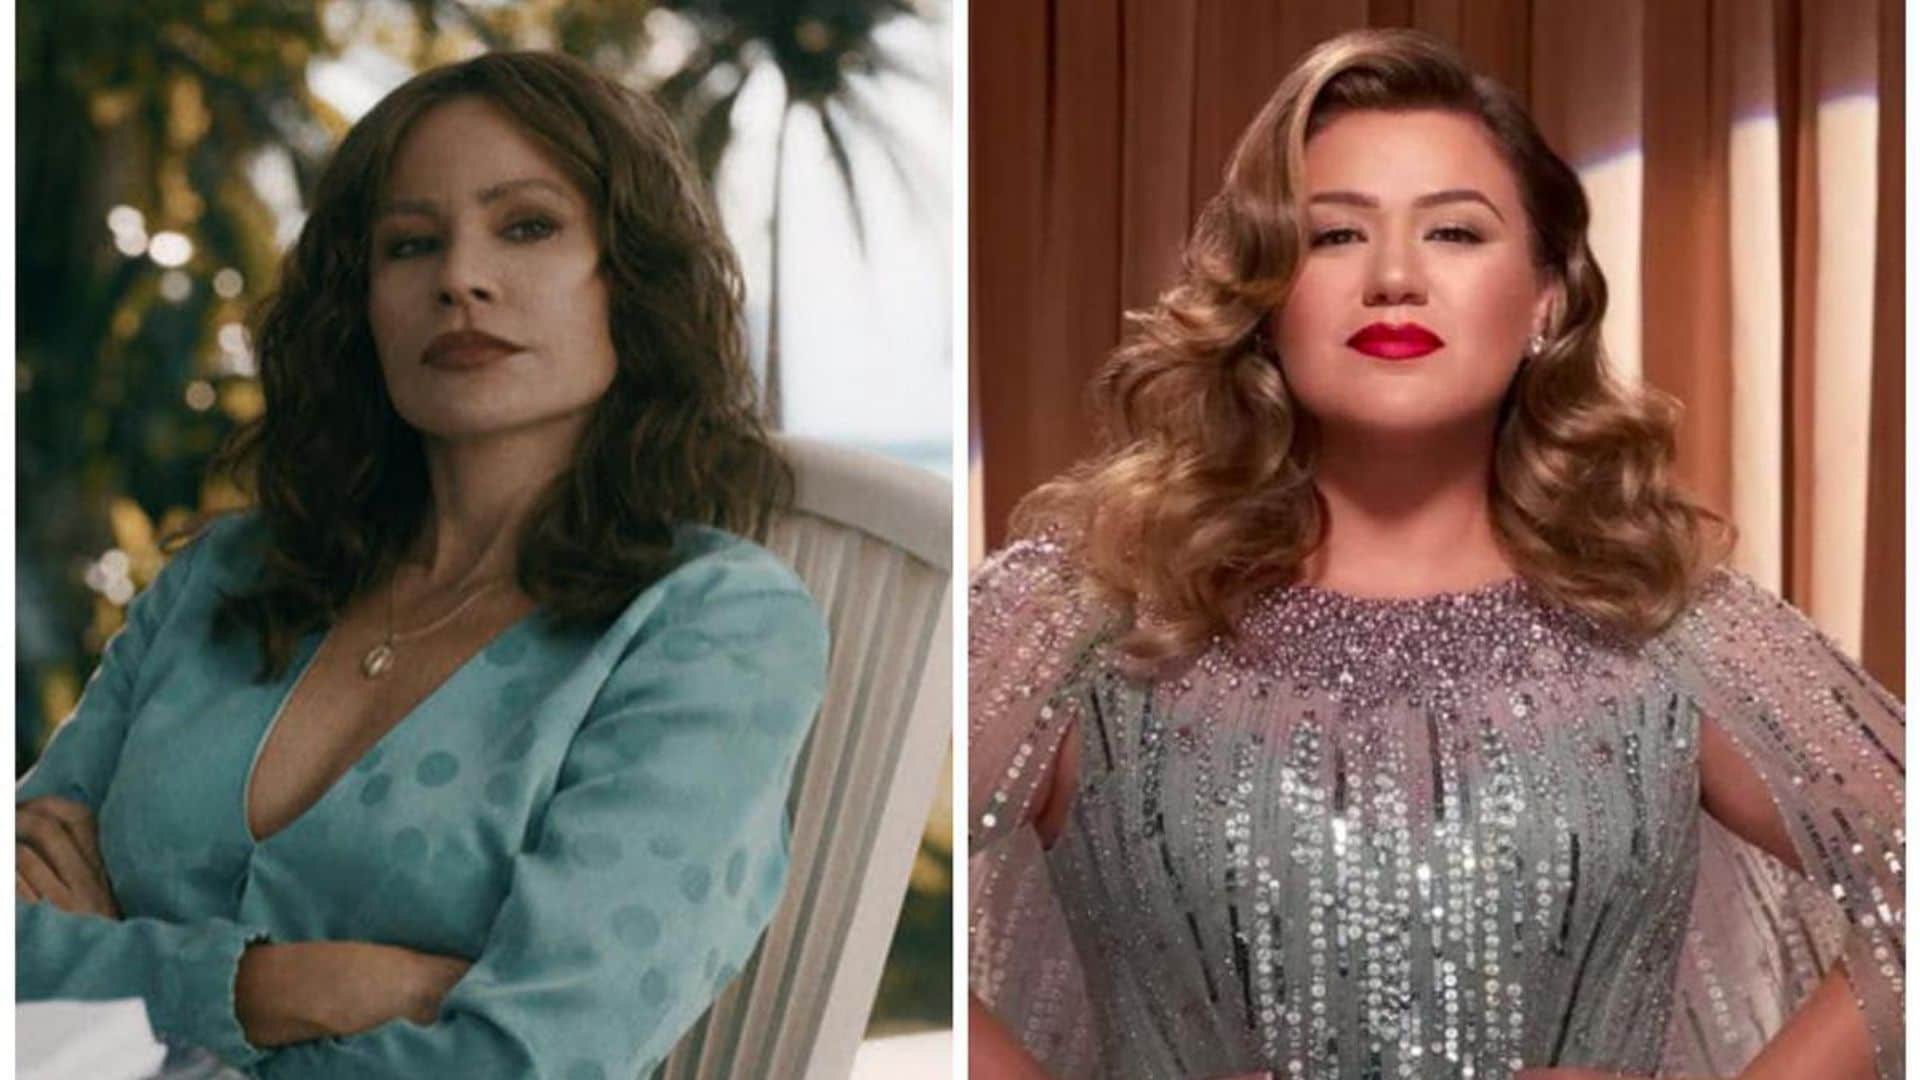 Sofia Vergara’s over-the-top reaction to Kelly Clarkson’s comments about her looks in ‘Griselda’